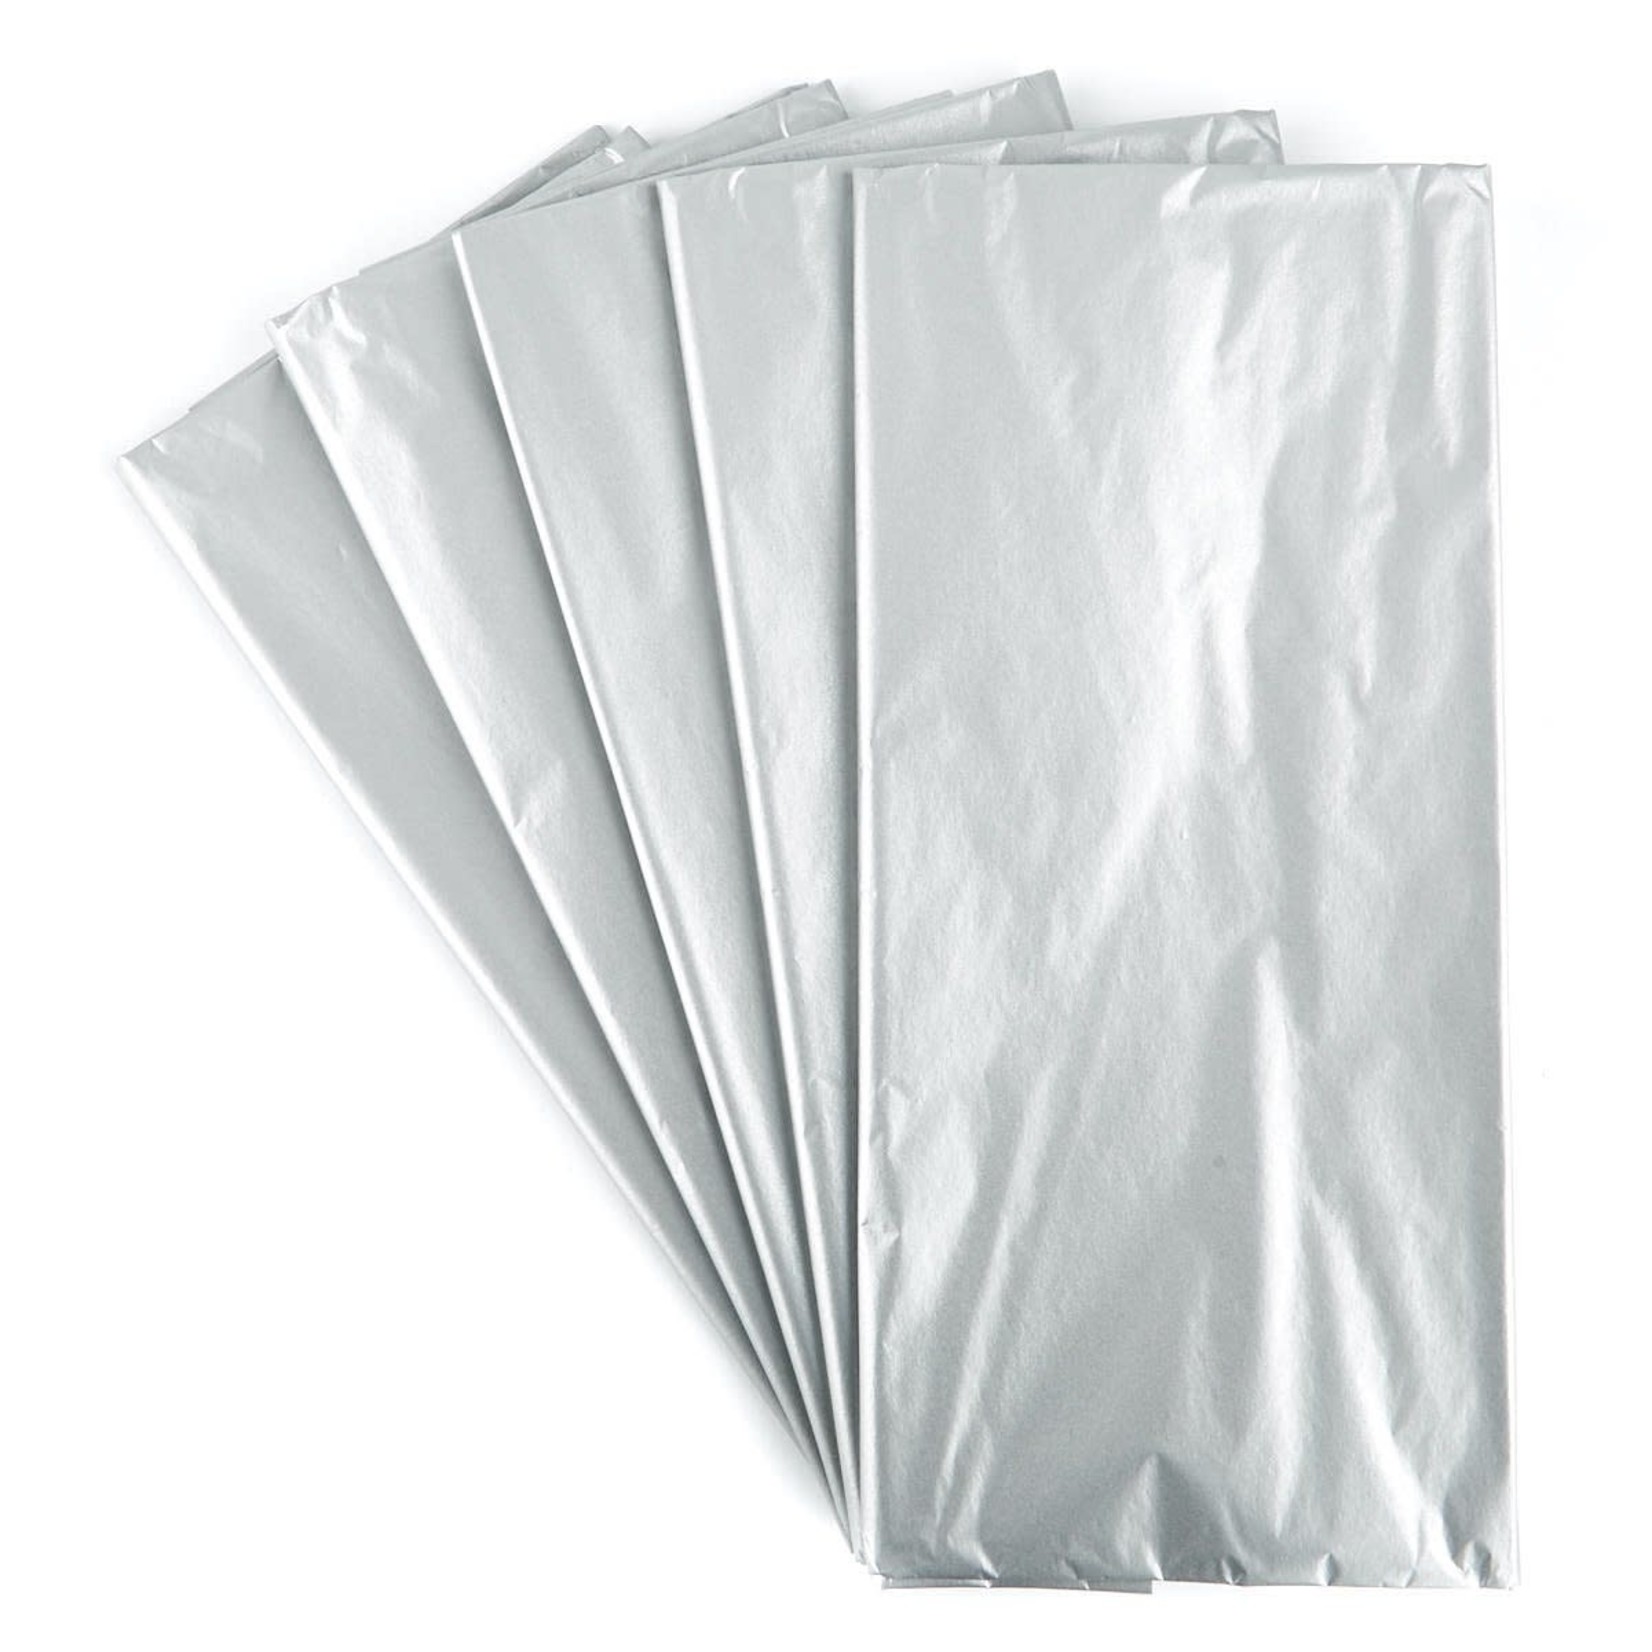 County Stationery Metallic Tissue Paper - Silver  - 5 sheets